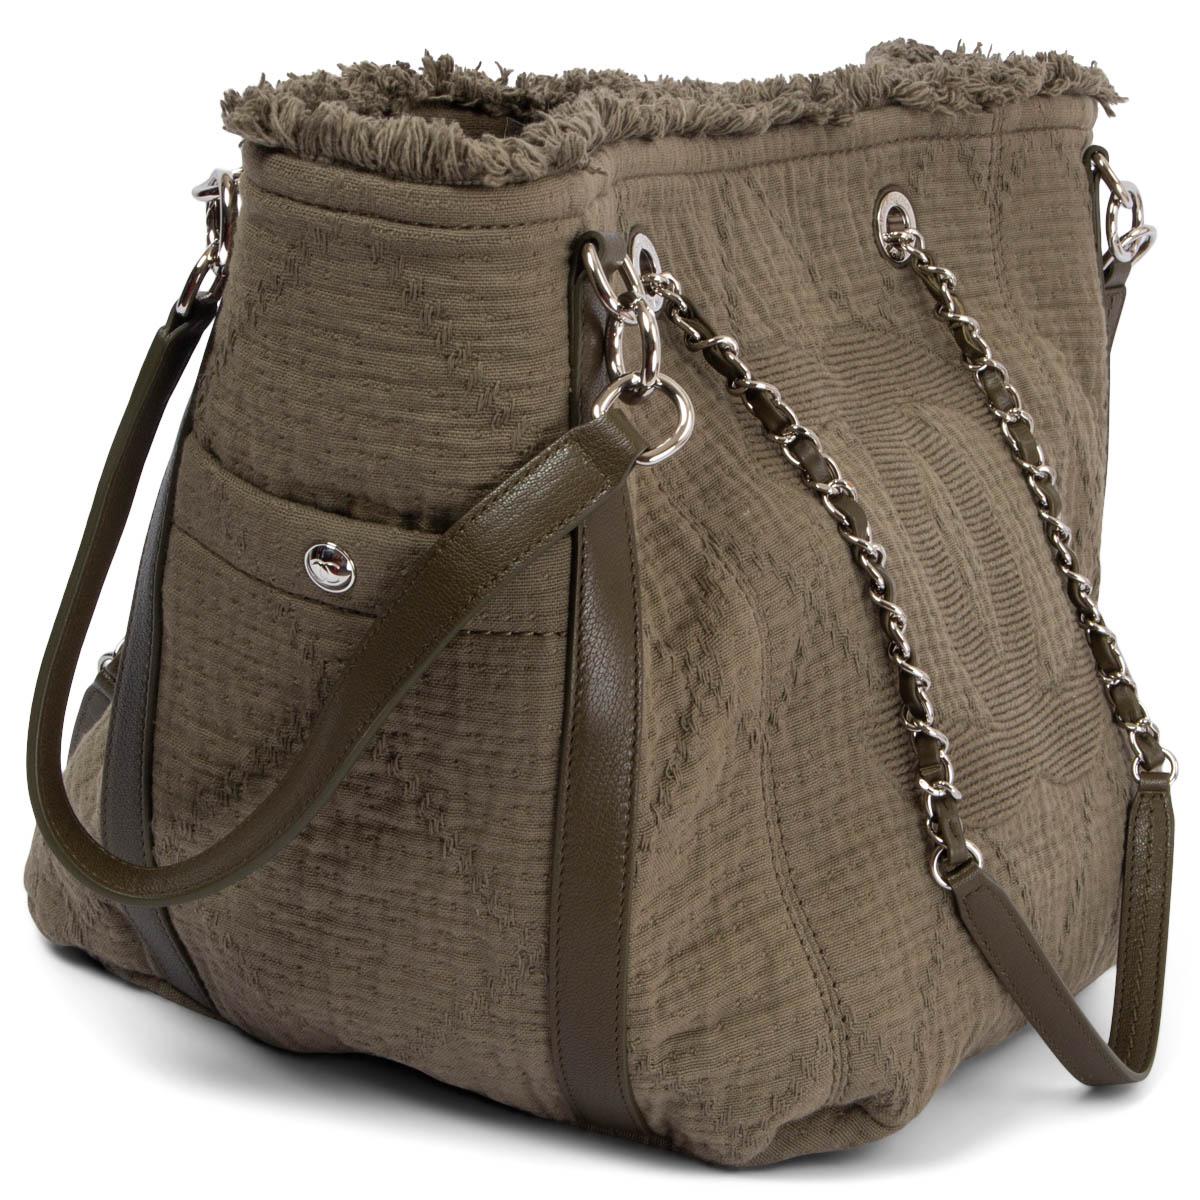 100% authentic Chanel fringed tote bag in drab olive double face cotton canvas featuring silver-tone hardware. Can be worn two different ways and comes with detachable side shoulder-straps and two side pockets. Opens with a magnetic button and is